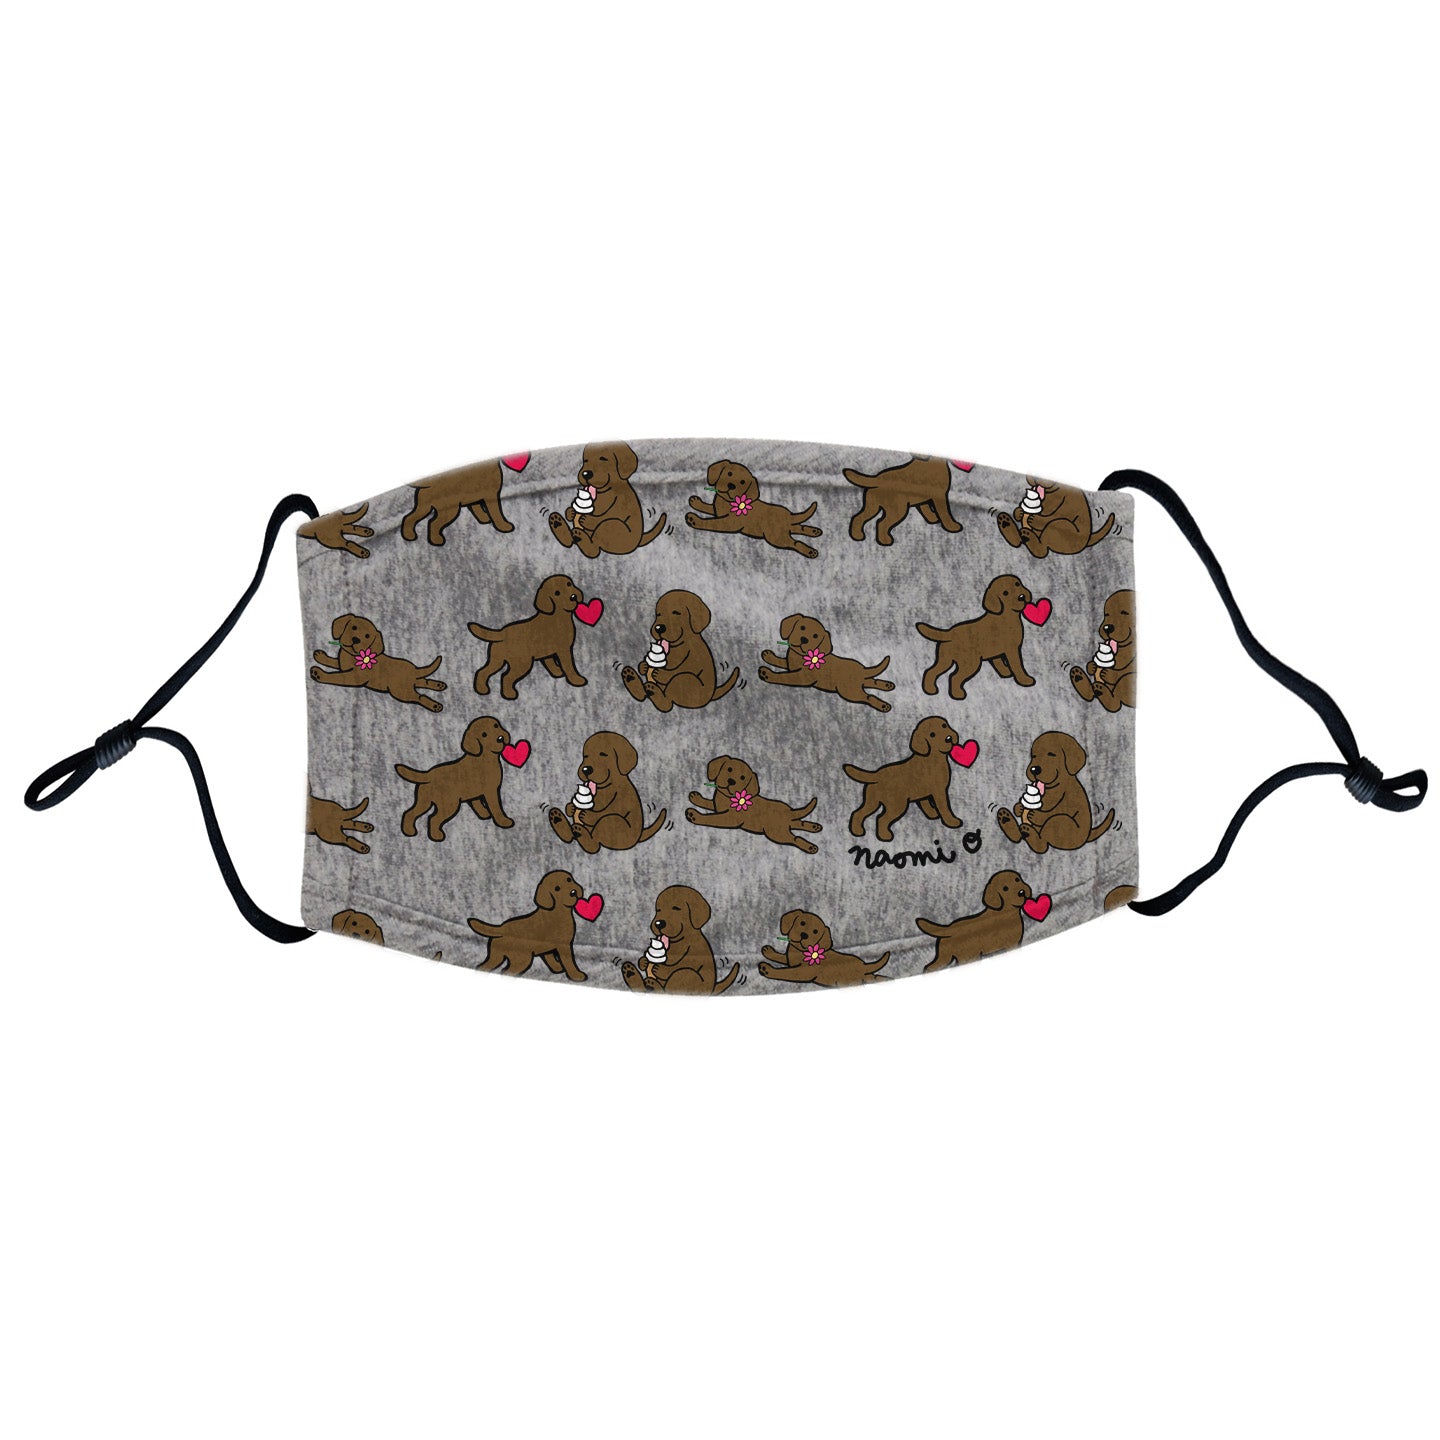 Chocolate Lab Puppy Cartoon Pattern Face Mask - Adjustable Ear Loops, Reusable & Washable, Cloth - Animal Pride